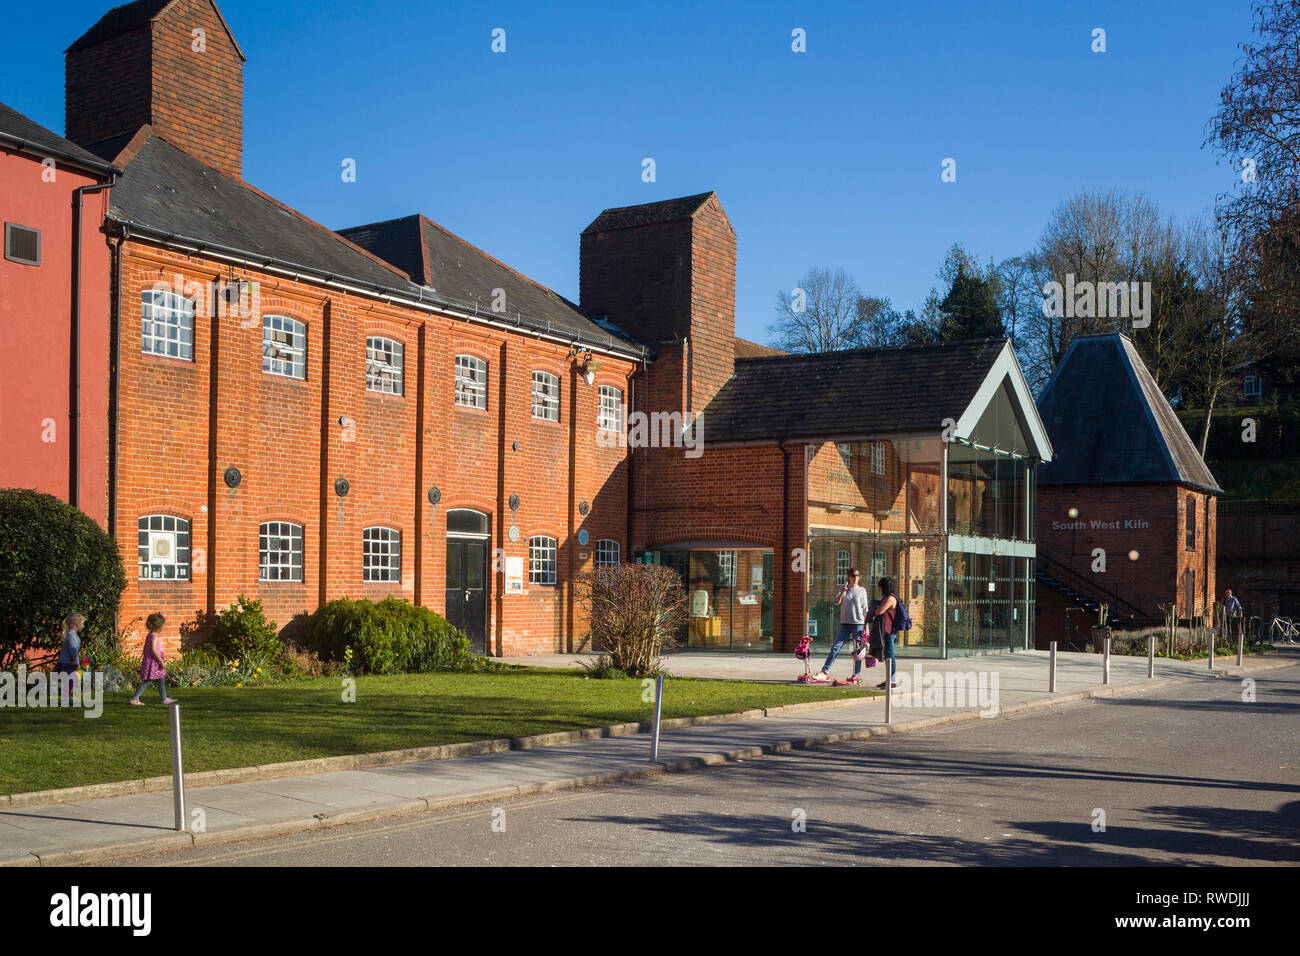 Two young mothers chat in front of he Farnham Maltings, the museum, arts, theatre and community centre in a converted brewery in Farnham, Surrey. Stock Photo